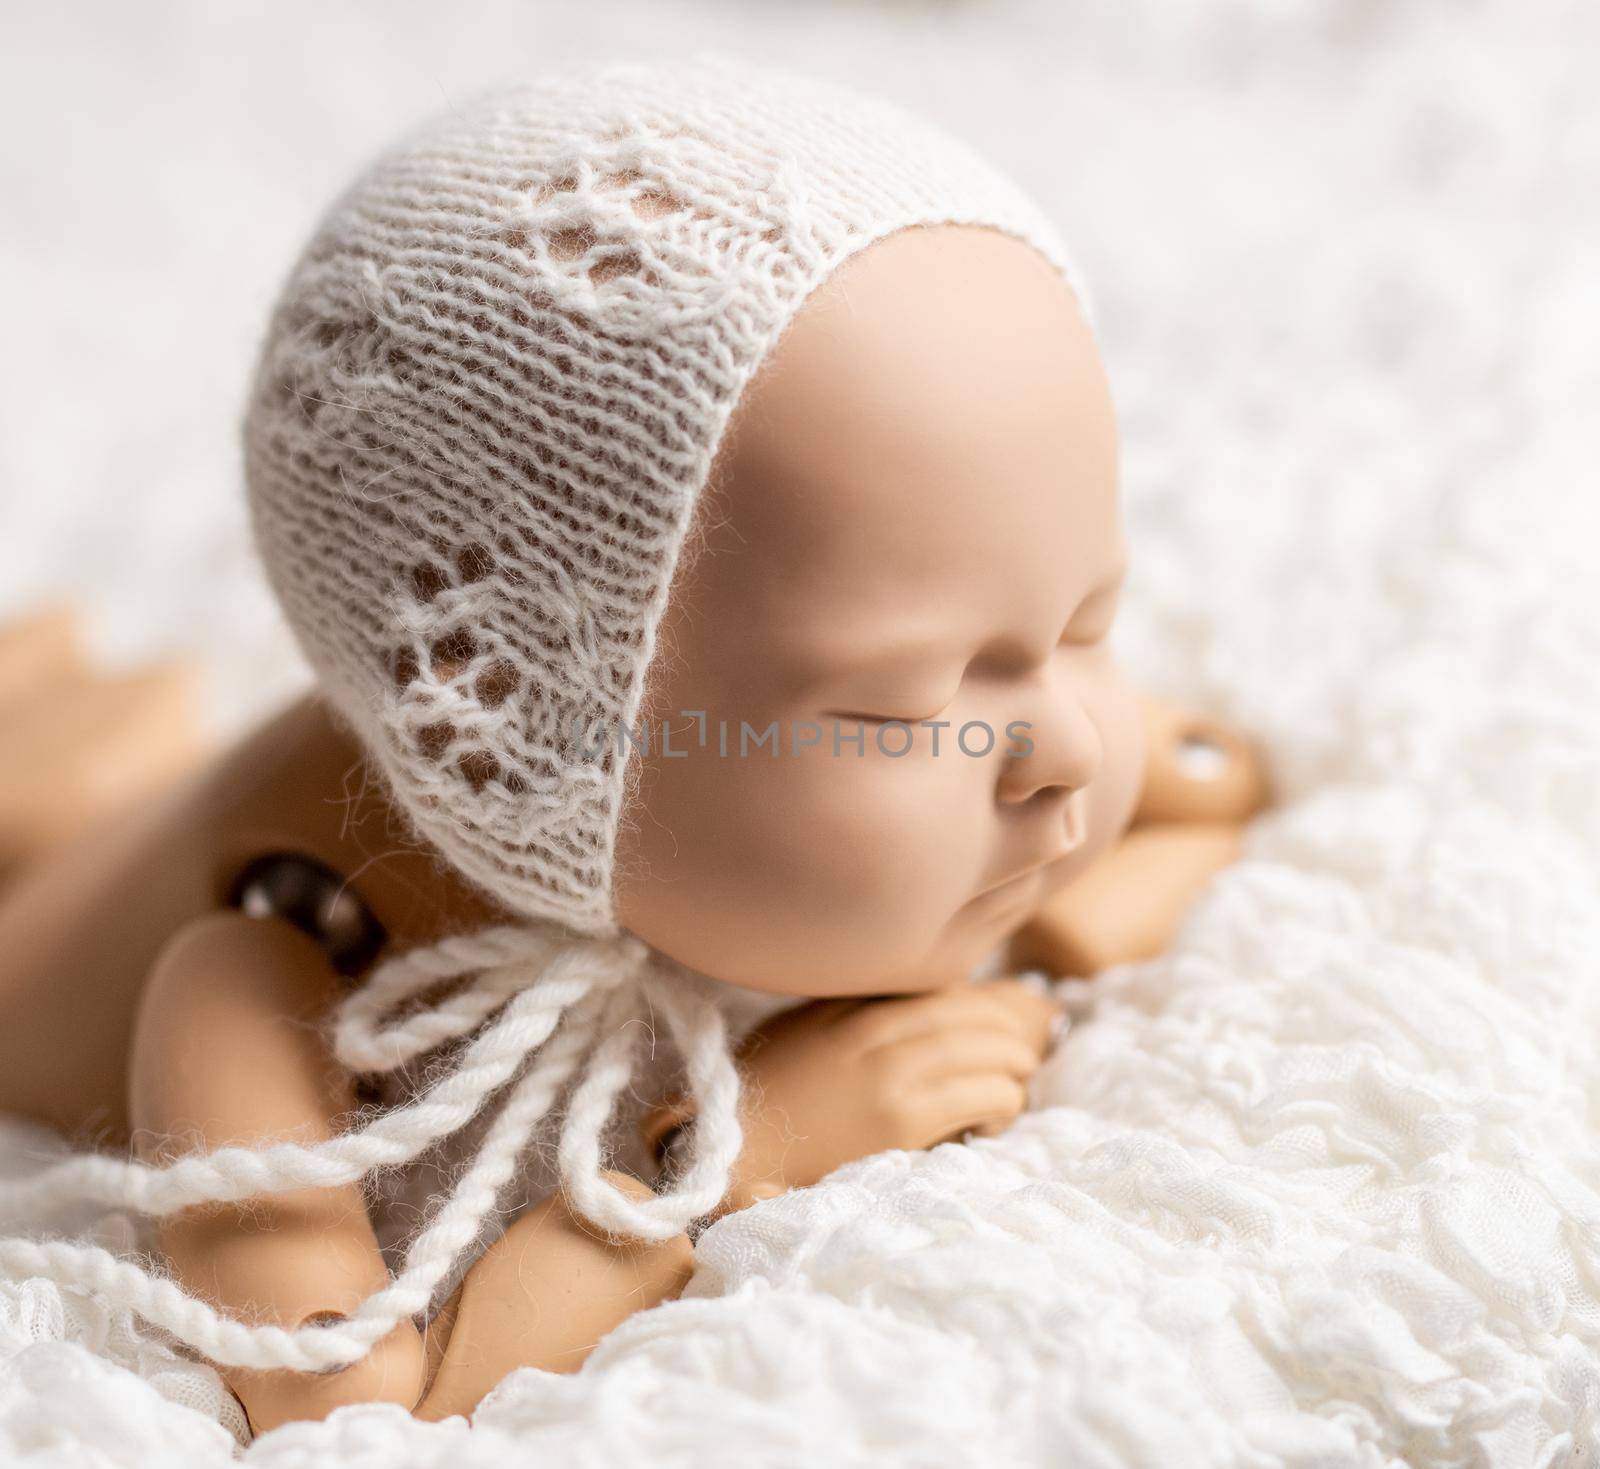 Realistic plastic figure of newborn child for photographing practice, with head on hands